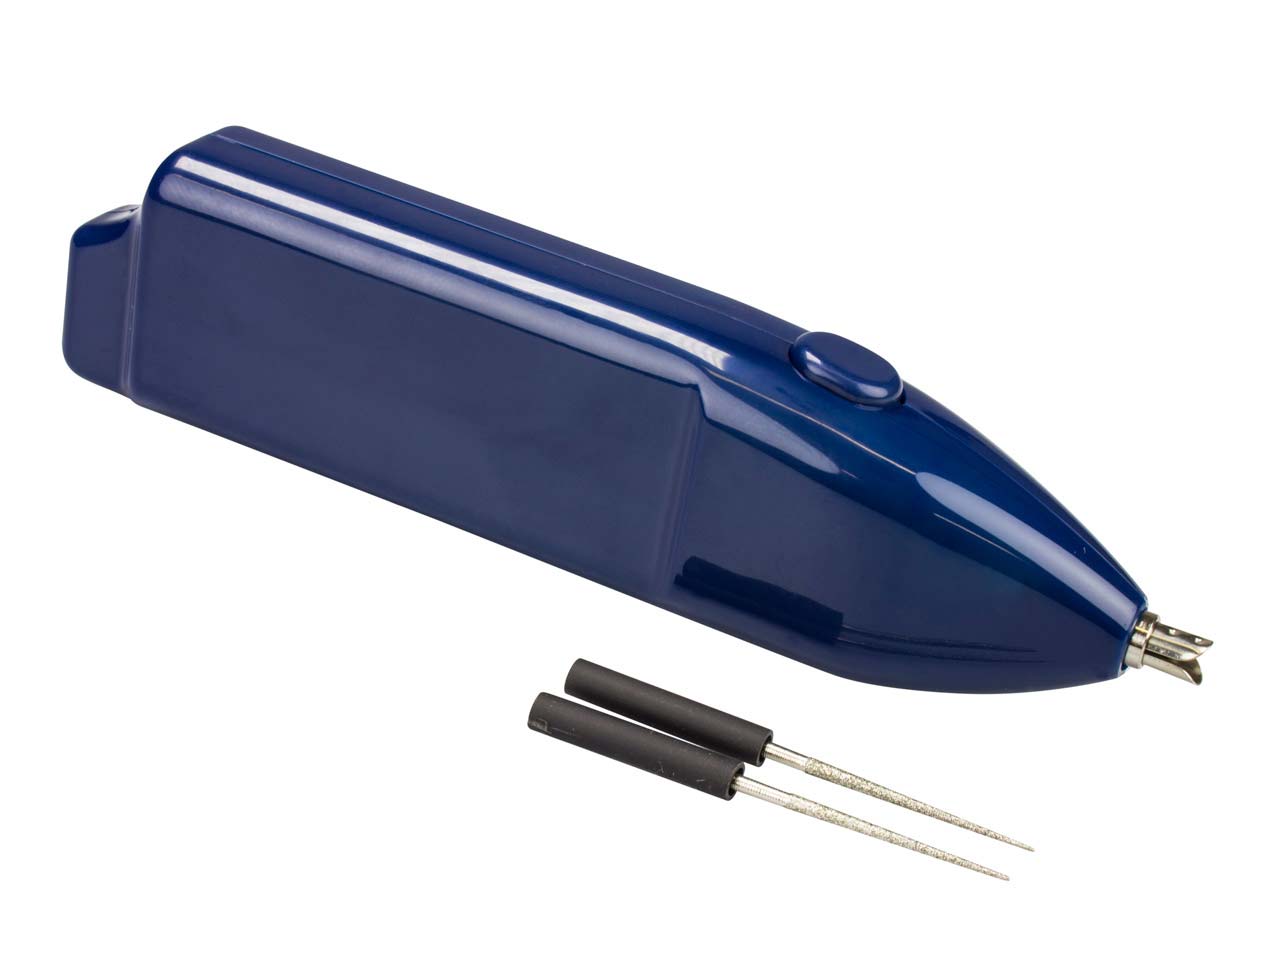 Beadalon Bead Reamer Battery Operated Questions & Answers